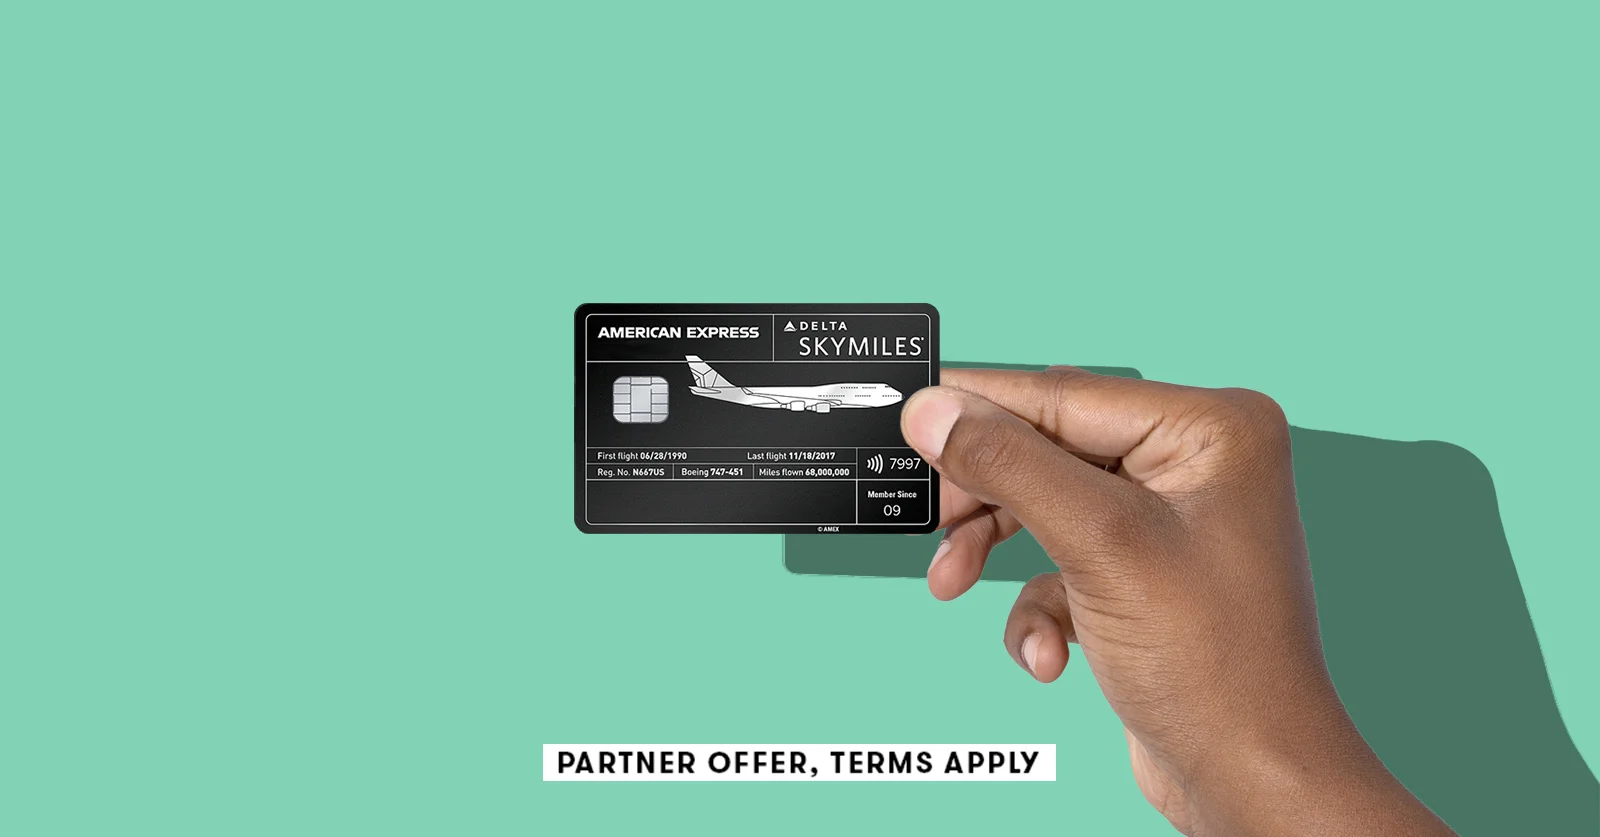 New offers on Delta cards, plus a limited edition card design – The Points Guy